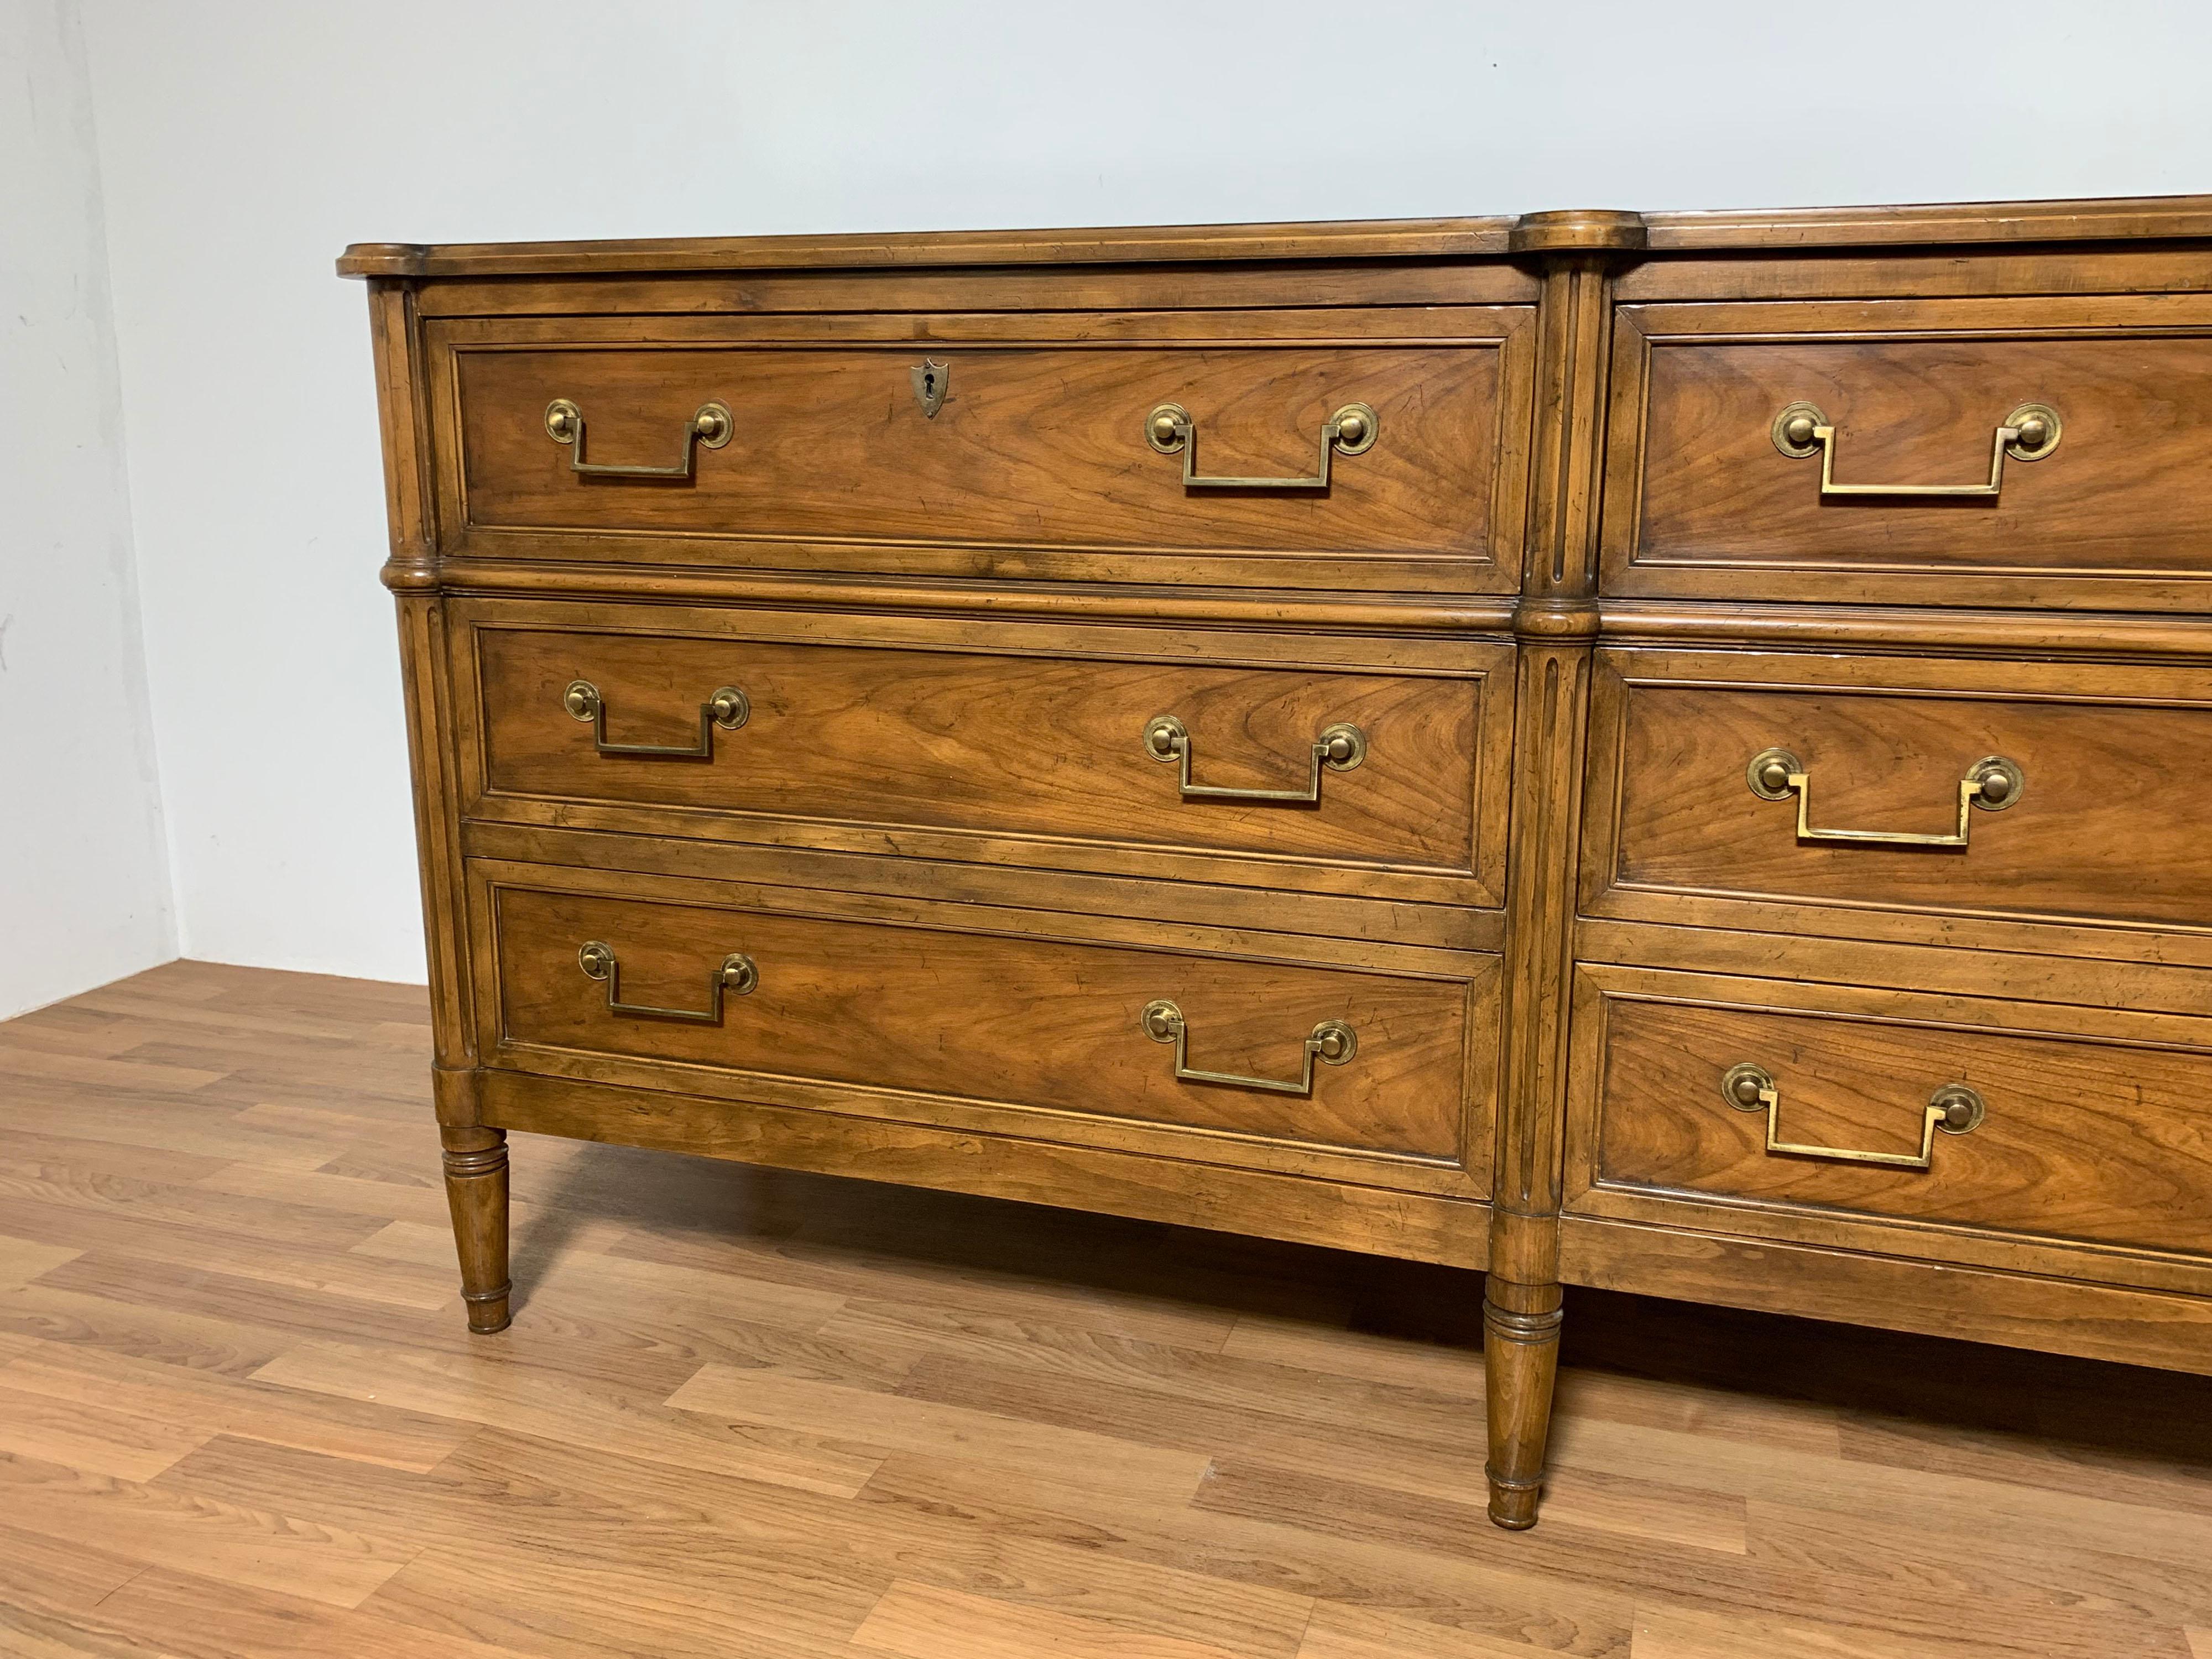 A finely crafted six drawer mahogany dresser in the English Regency style by Baker Furniture, ca. 1950s.
 